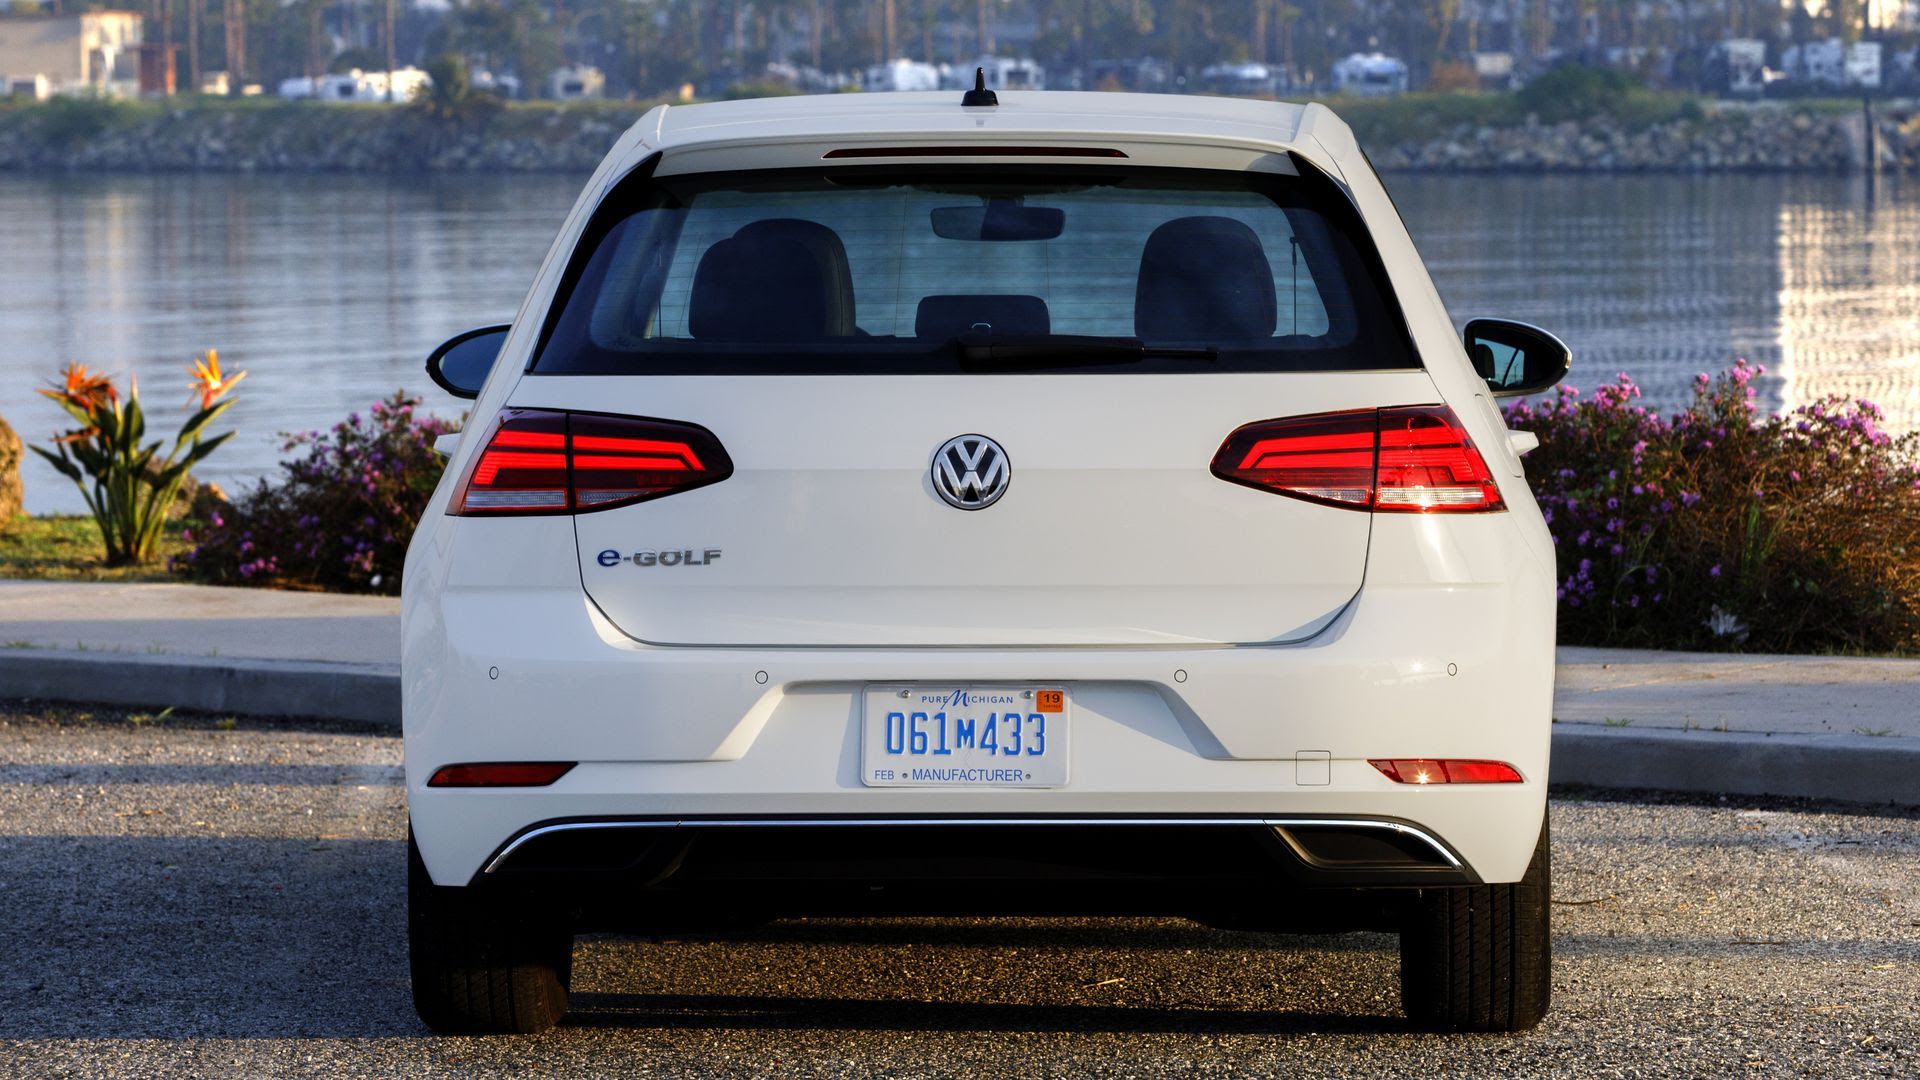 What we're driving: Volkswagen e-Golf